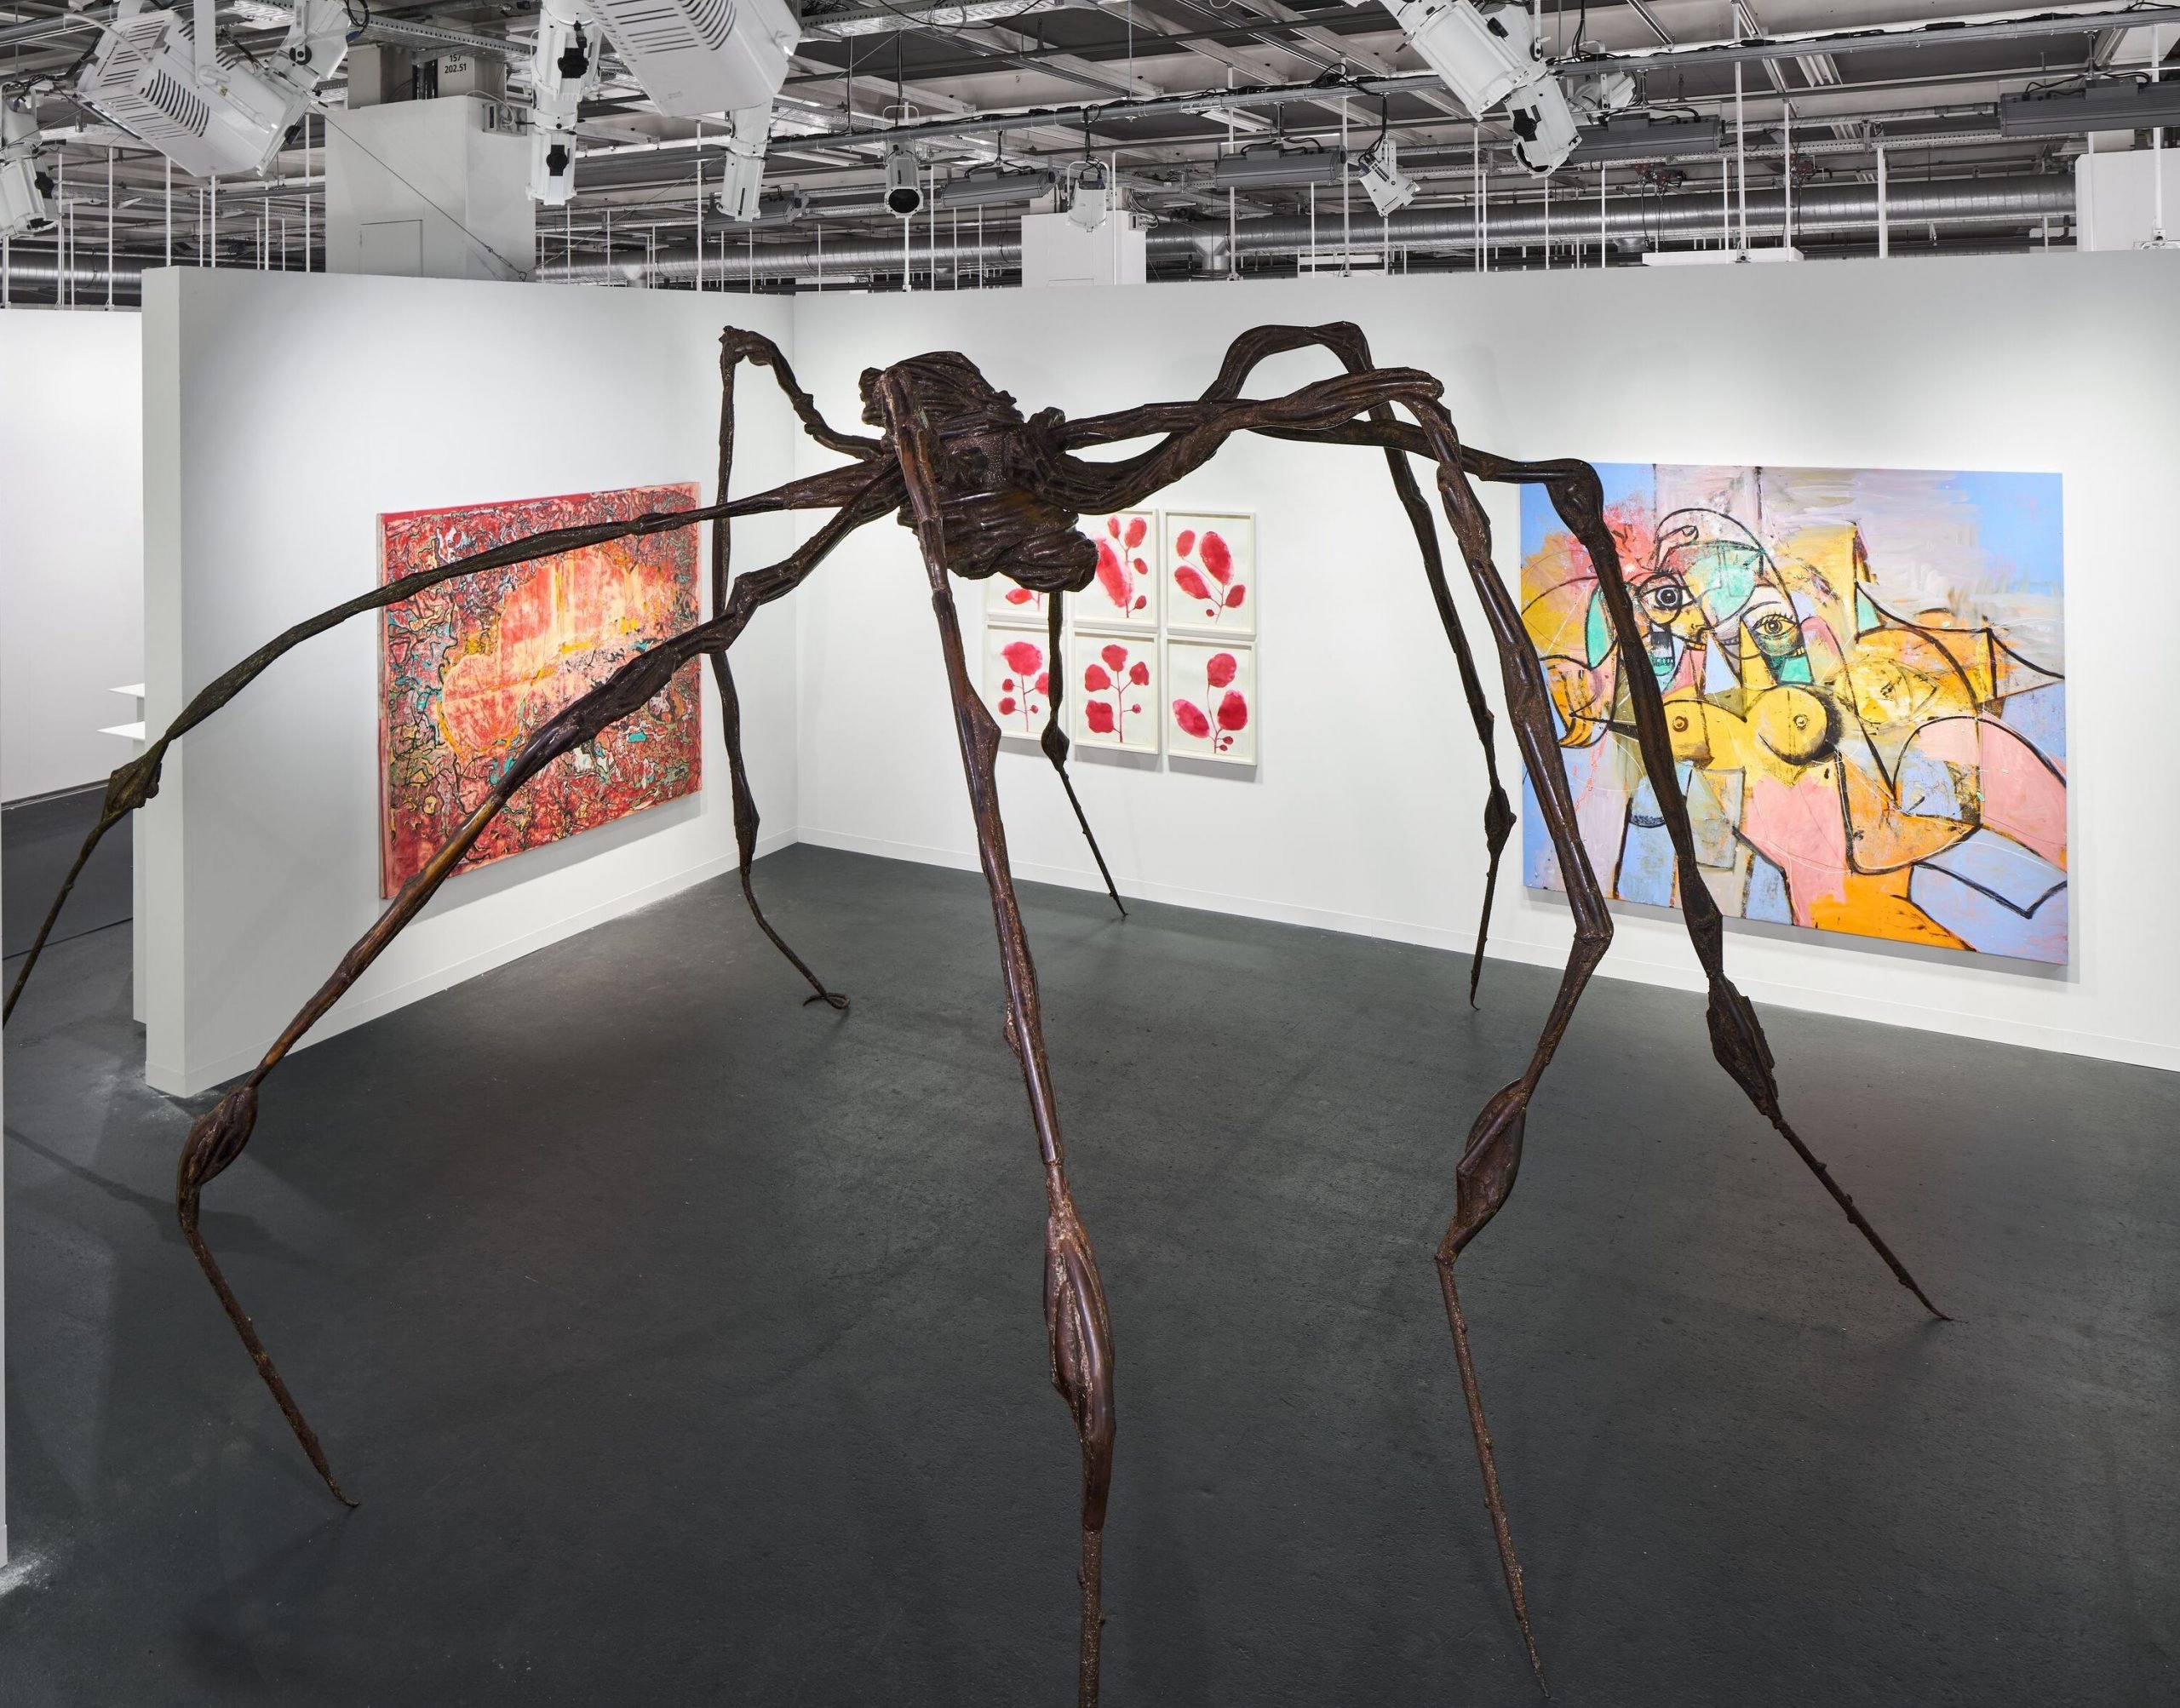 A $40 Million Spider Sculpture by Louise Bourgeois Is the Priciest Sale  Reported During Art Basel's Bustling VIP Preview